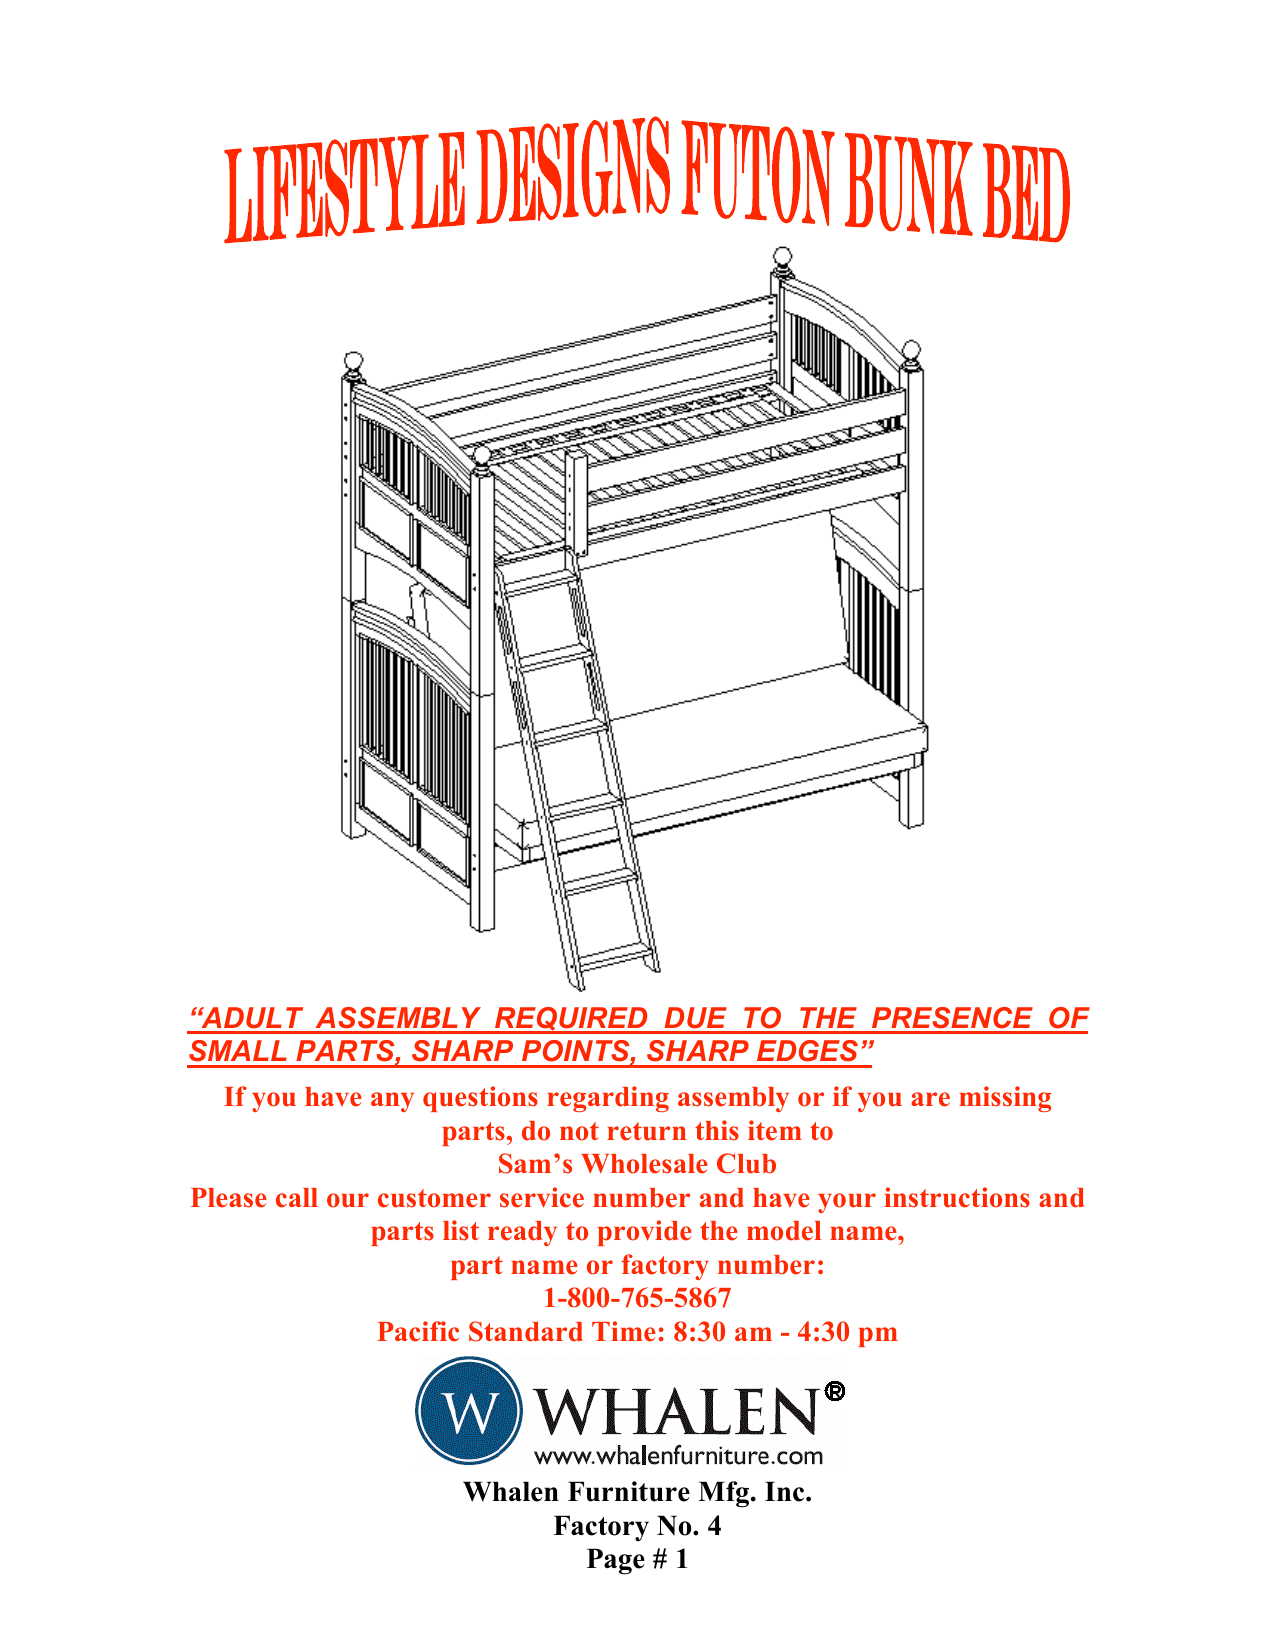 Whalen Furniture Mfg Inc Factory No, Acme Bunk Bed Assembly Instructions